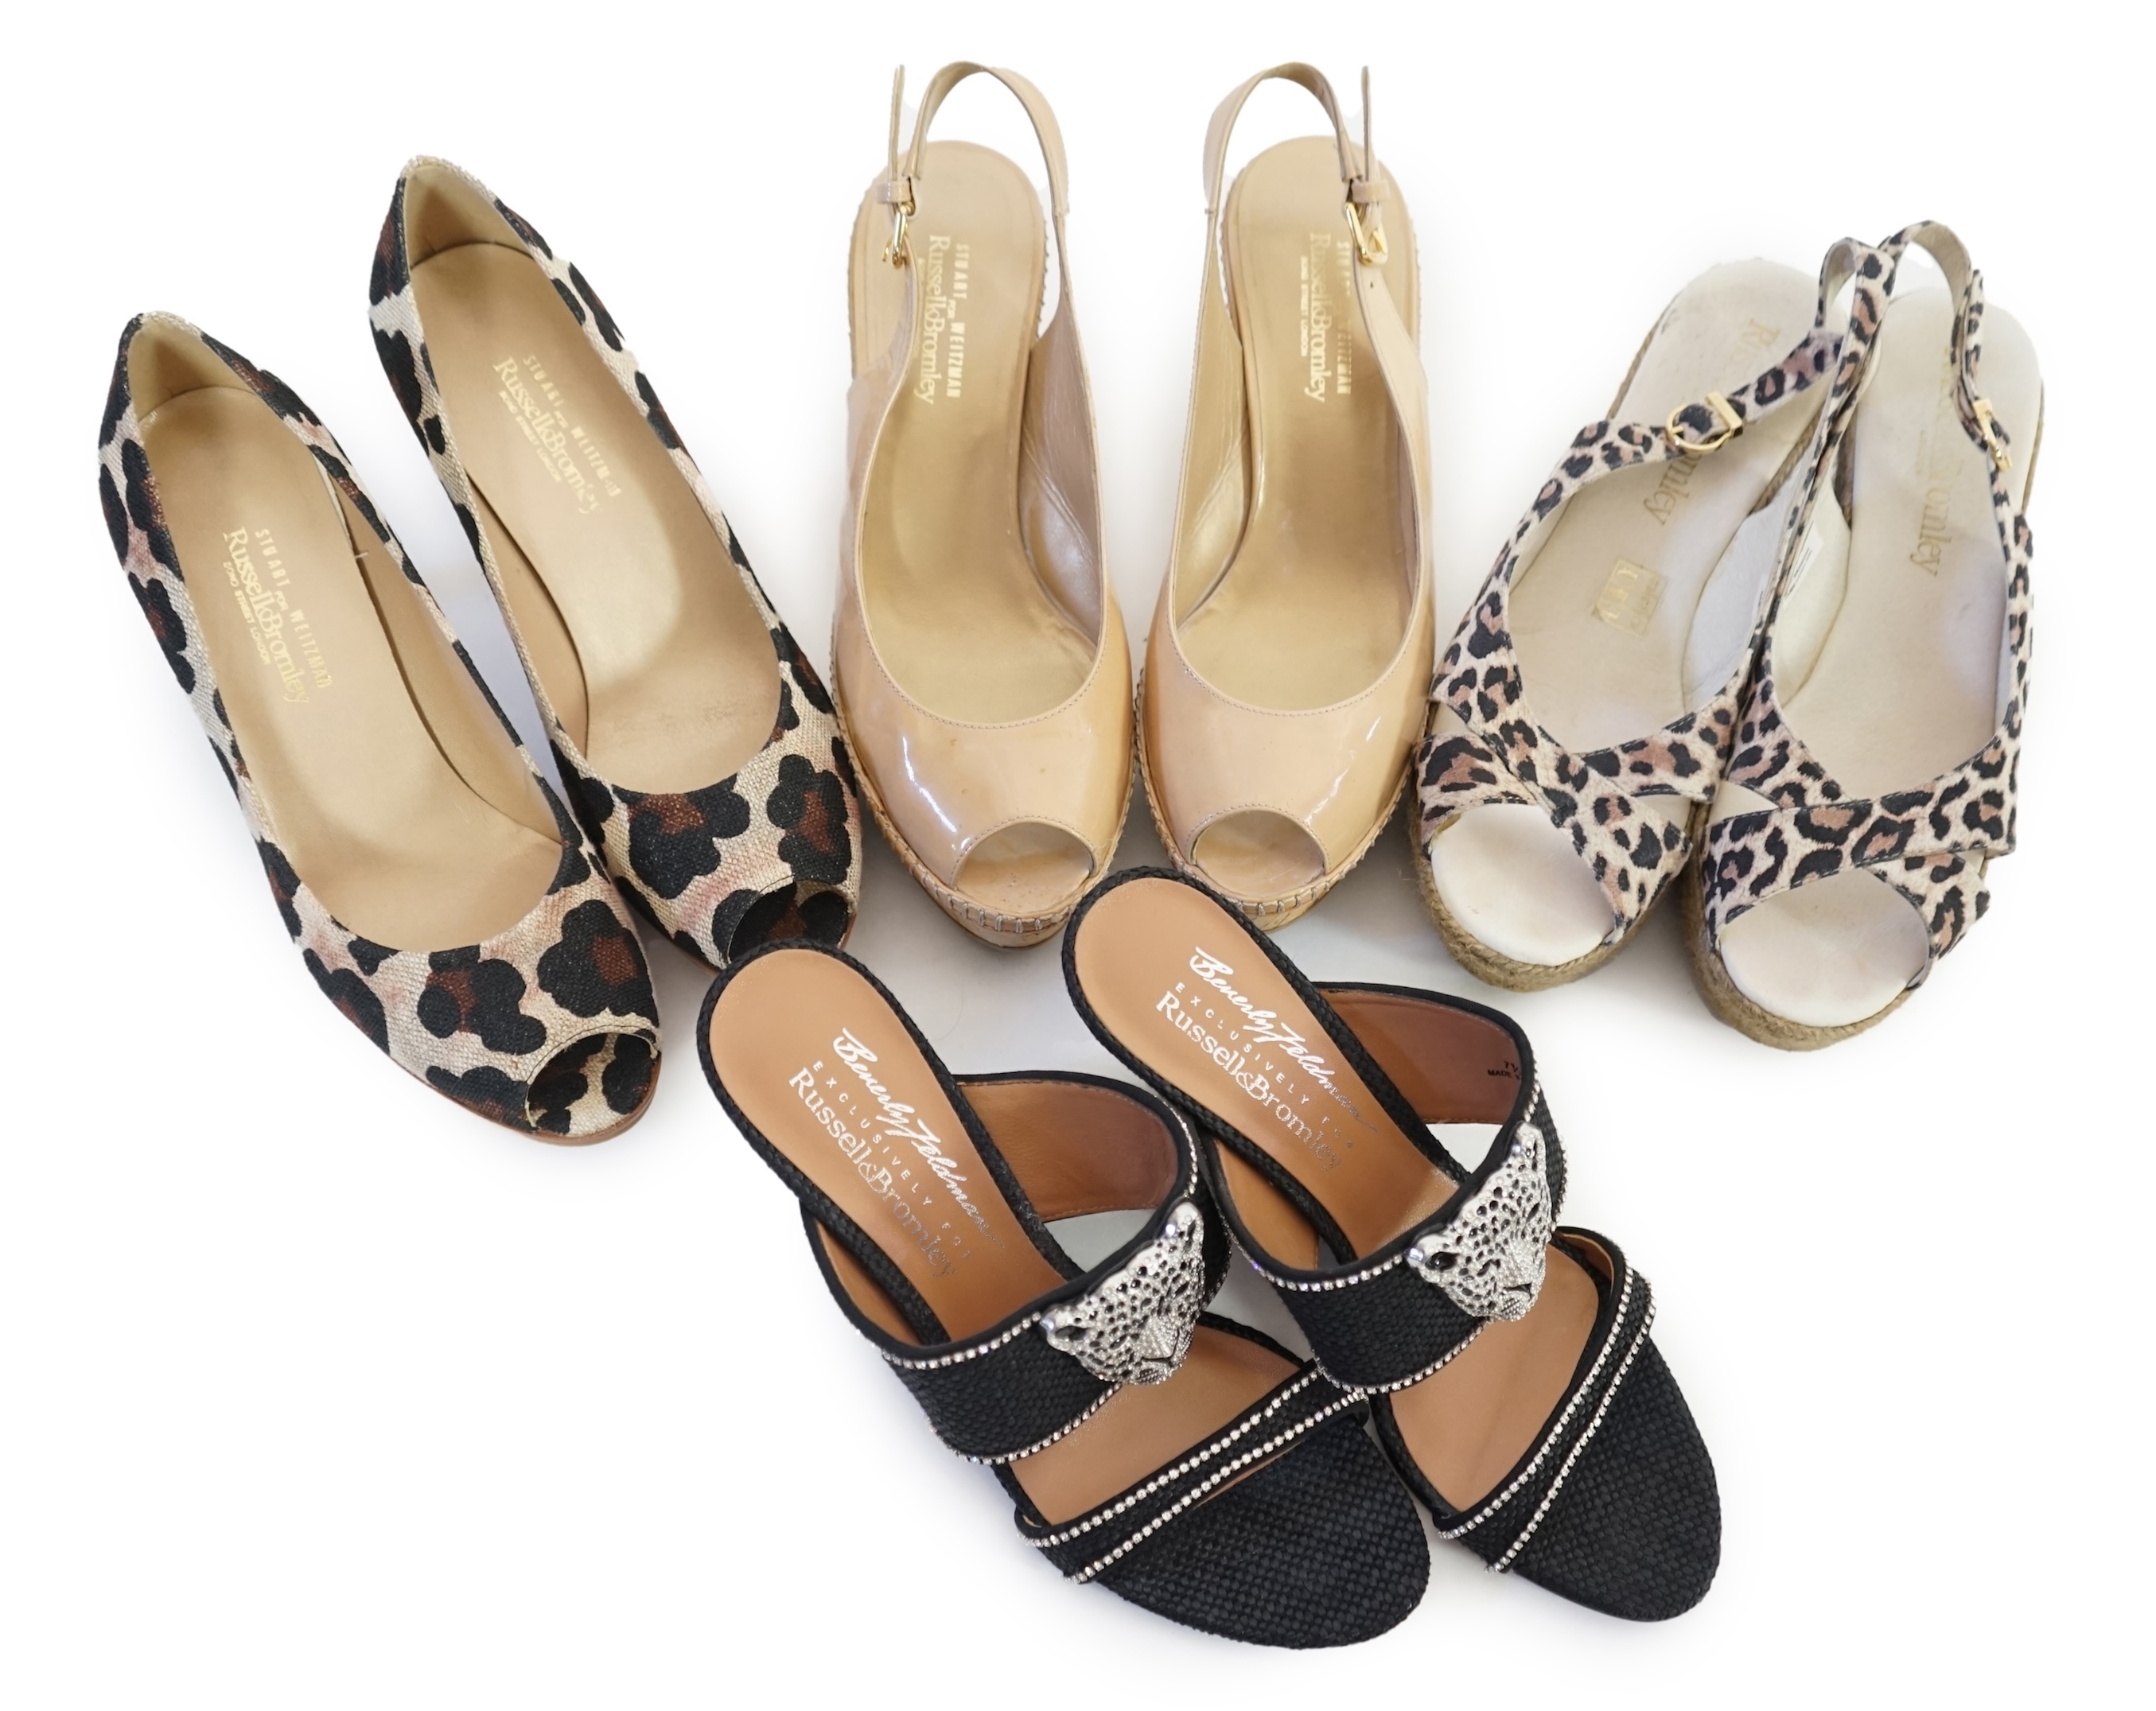 Four pairs of Russell & Bromley lady's heeled sandals, all size 38/38.5. Proceeds to Happy Paws Puppy Rescue